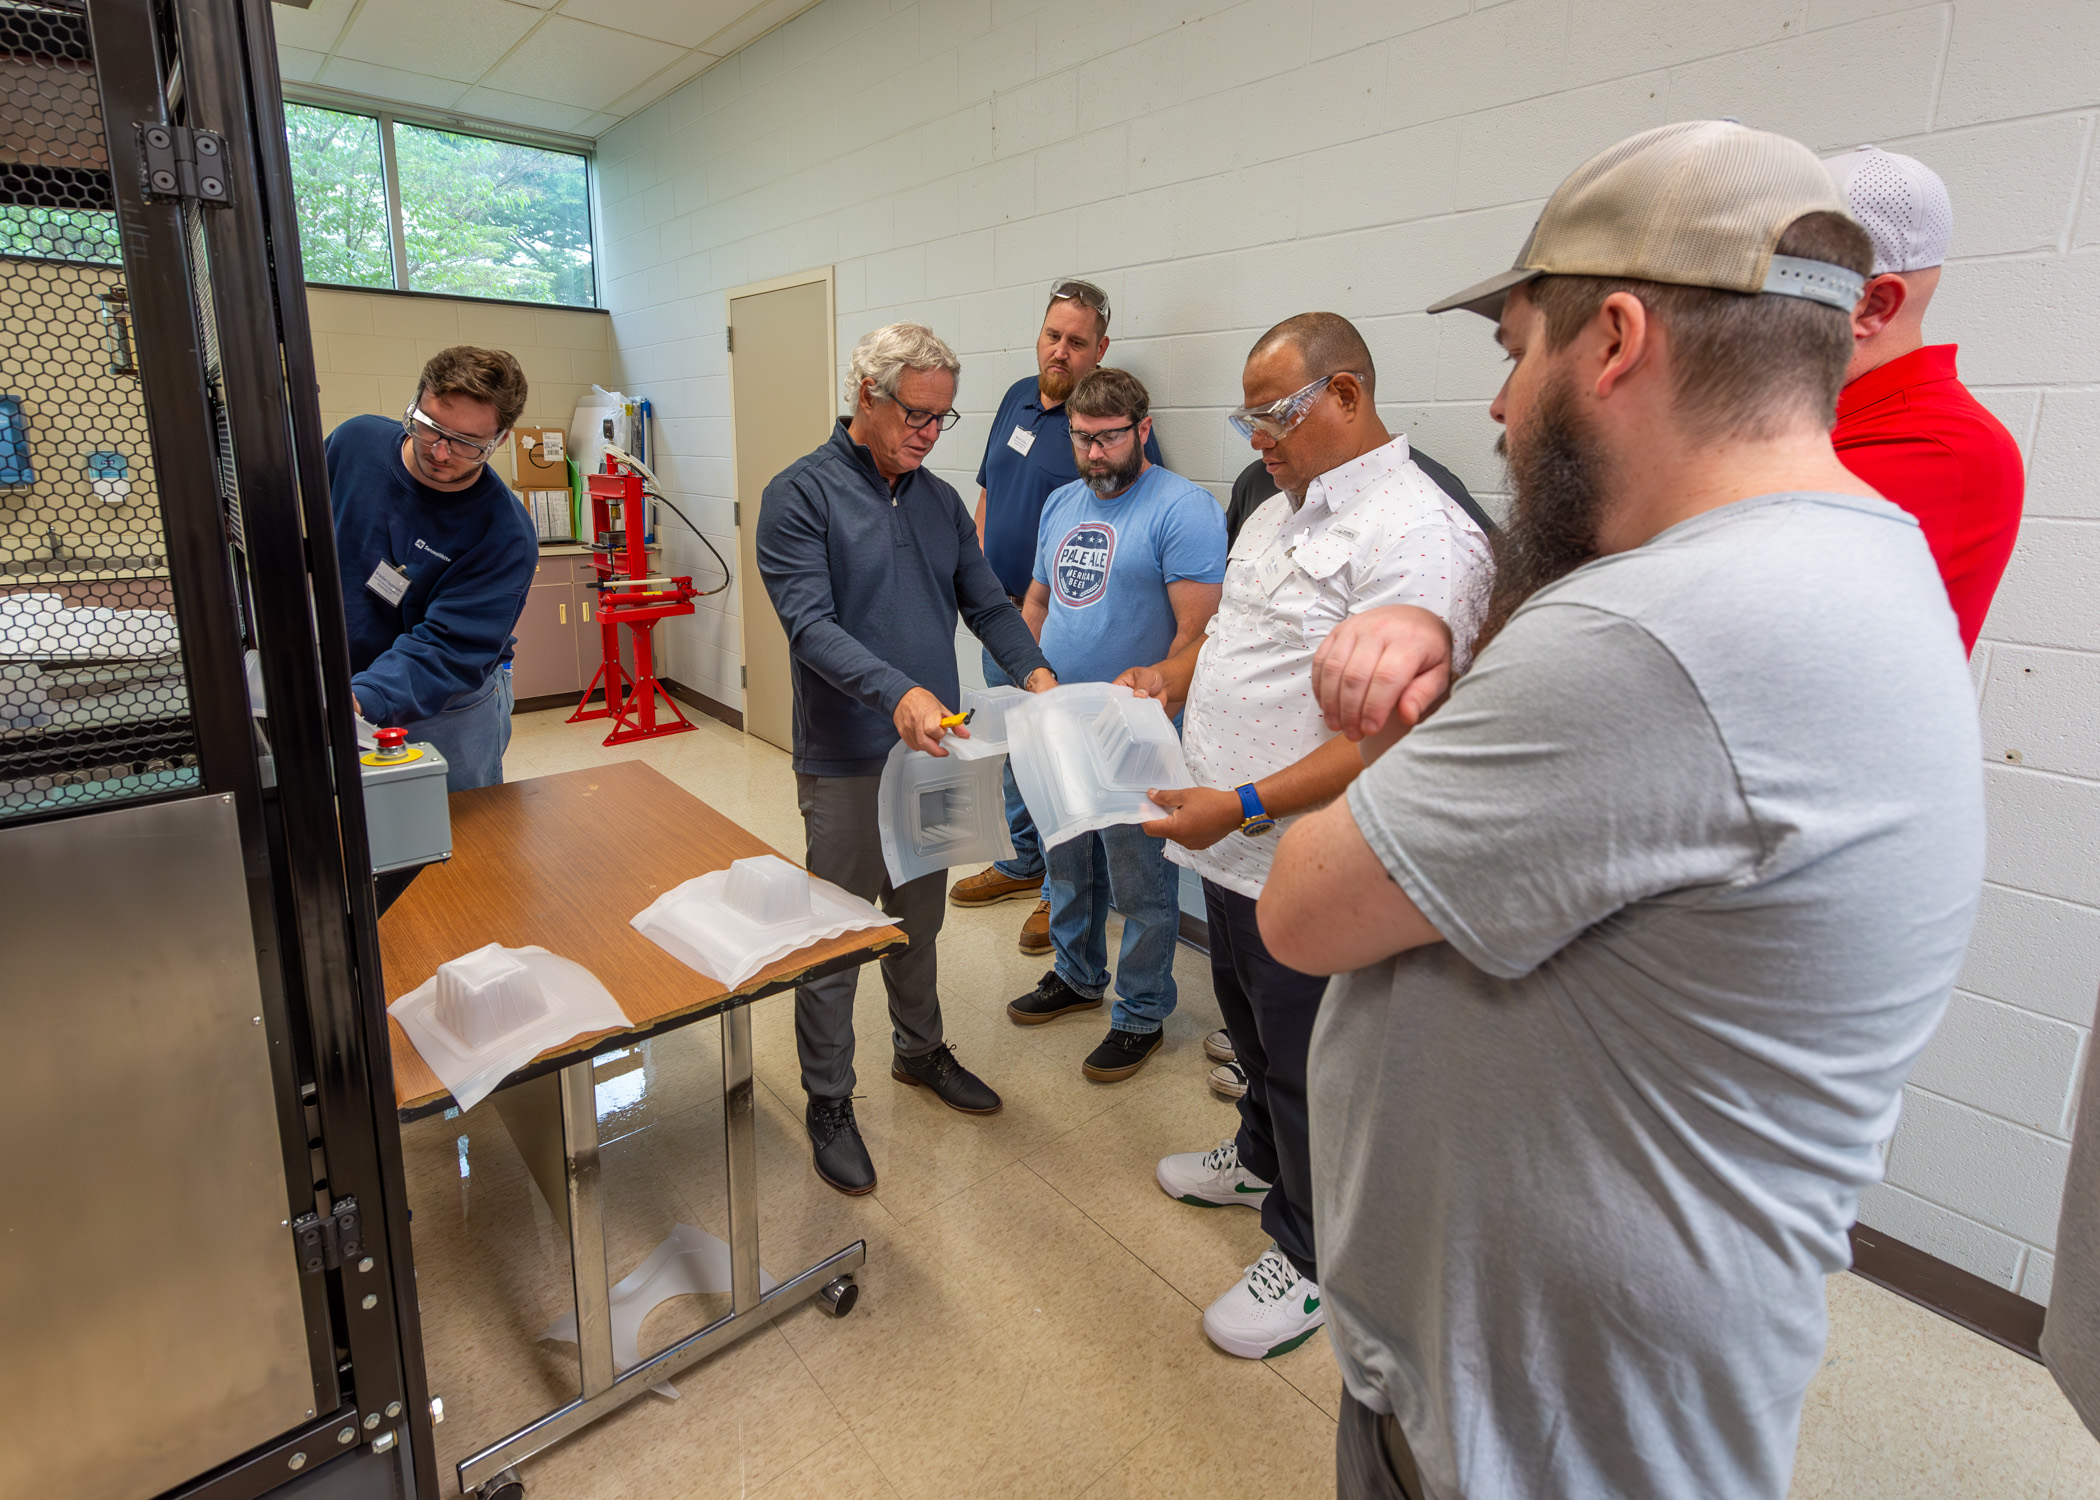 Nearly three dozen attend annual thermoforming workshop